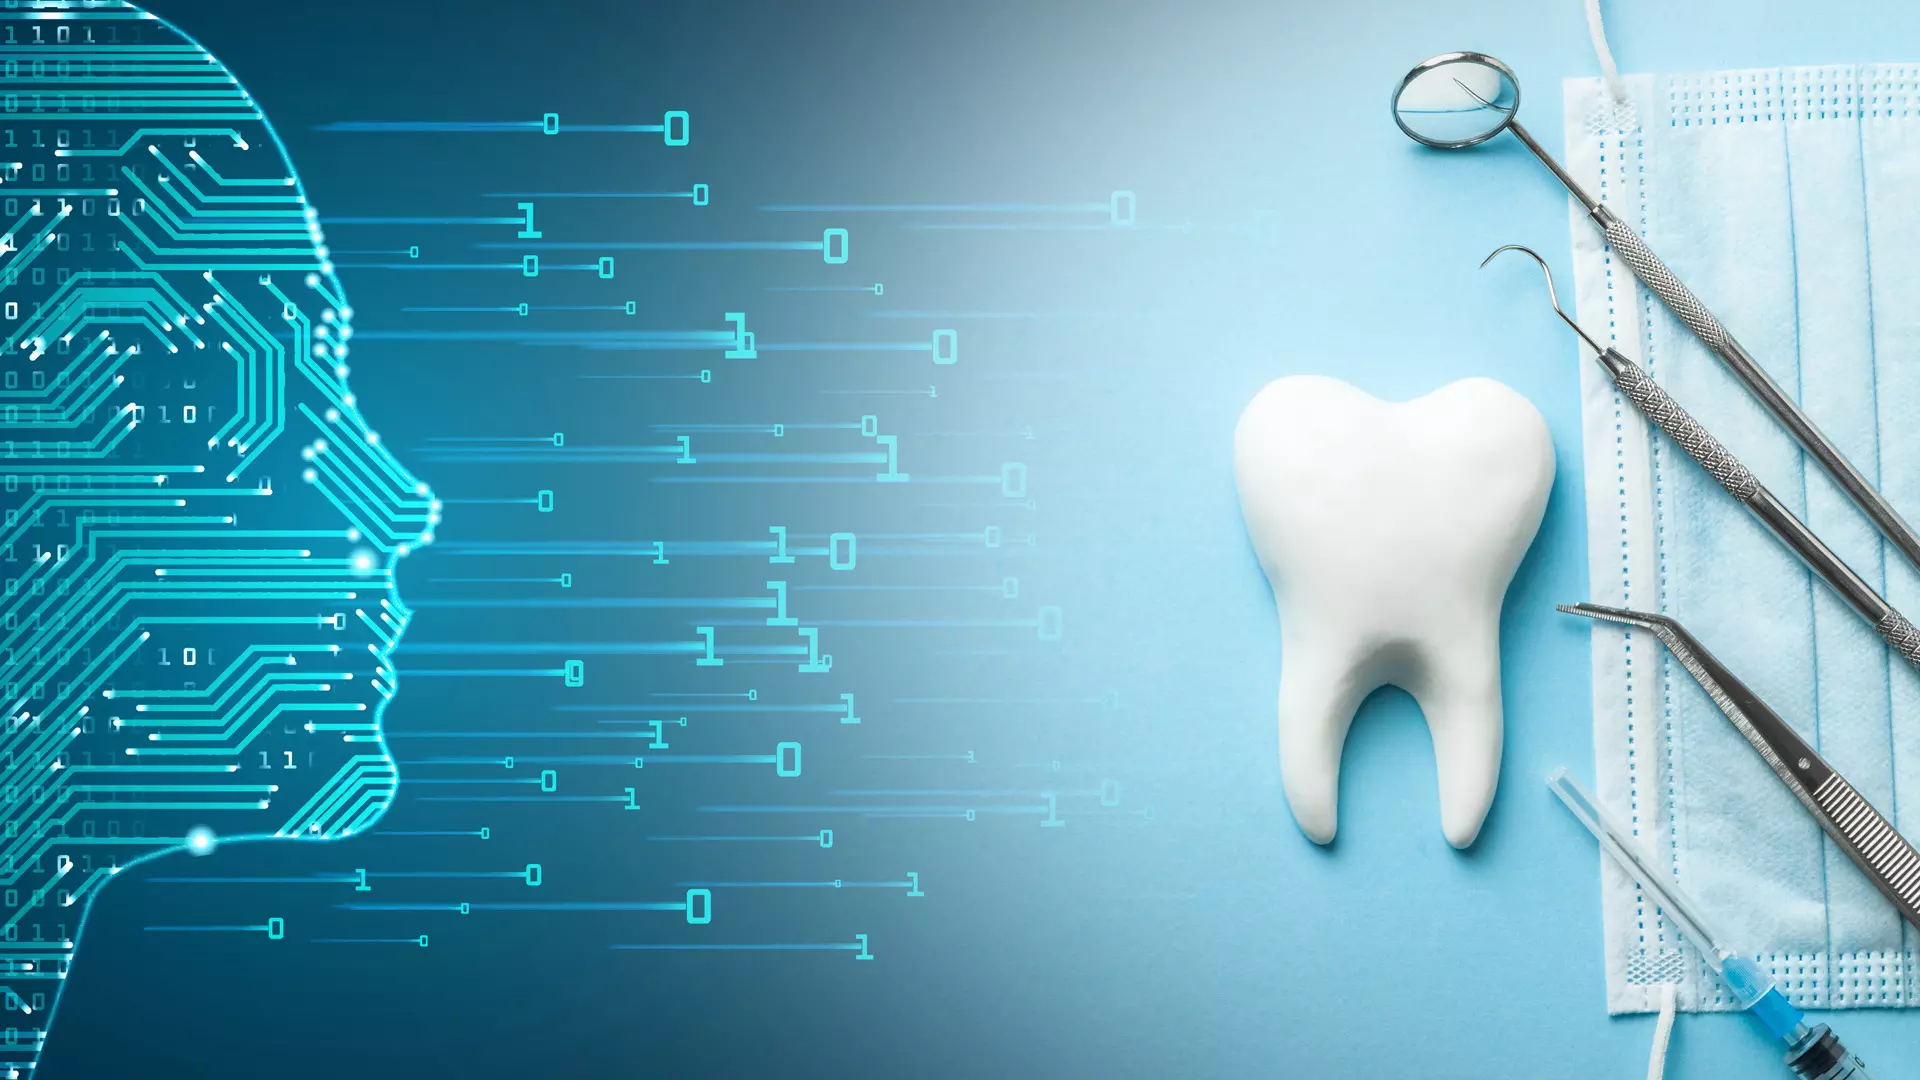 AI-based automated system enhances performance in dentistry: Study